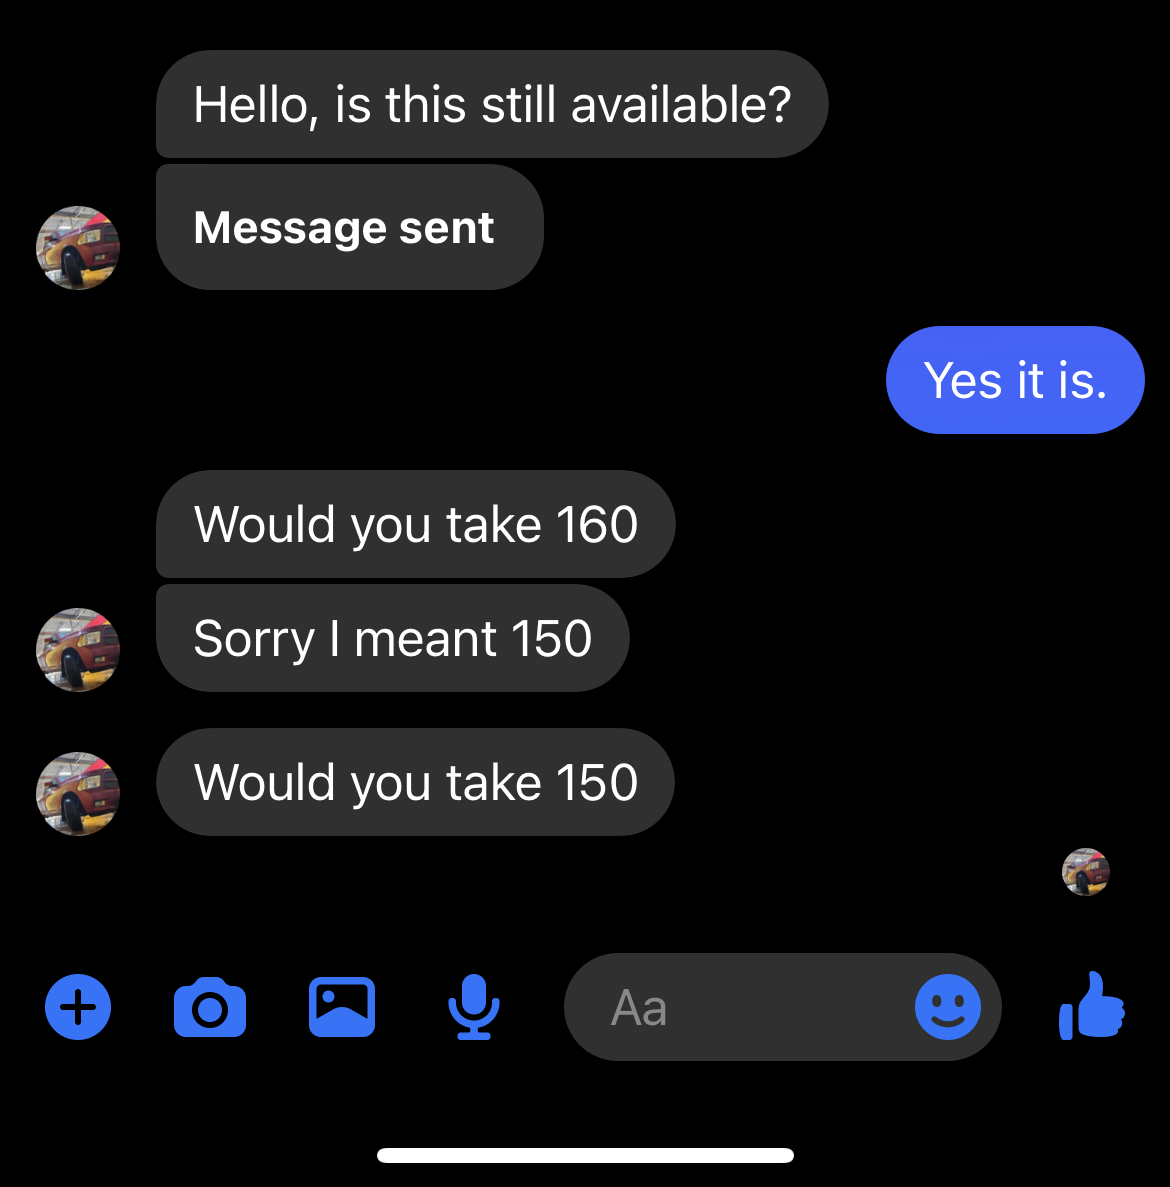 A conversation between me and a potential buyer where the buyer asks if it’s still available, then asks if “I’d take $160”, then quickly says “sorry I meant $150”, and then repeats again saying “would you take $150”. 